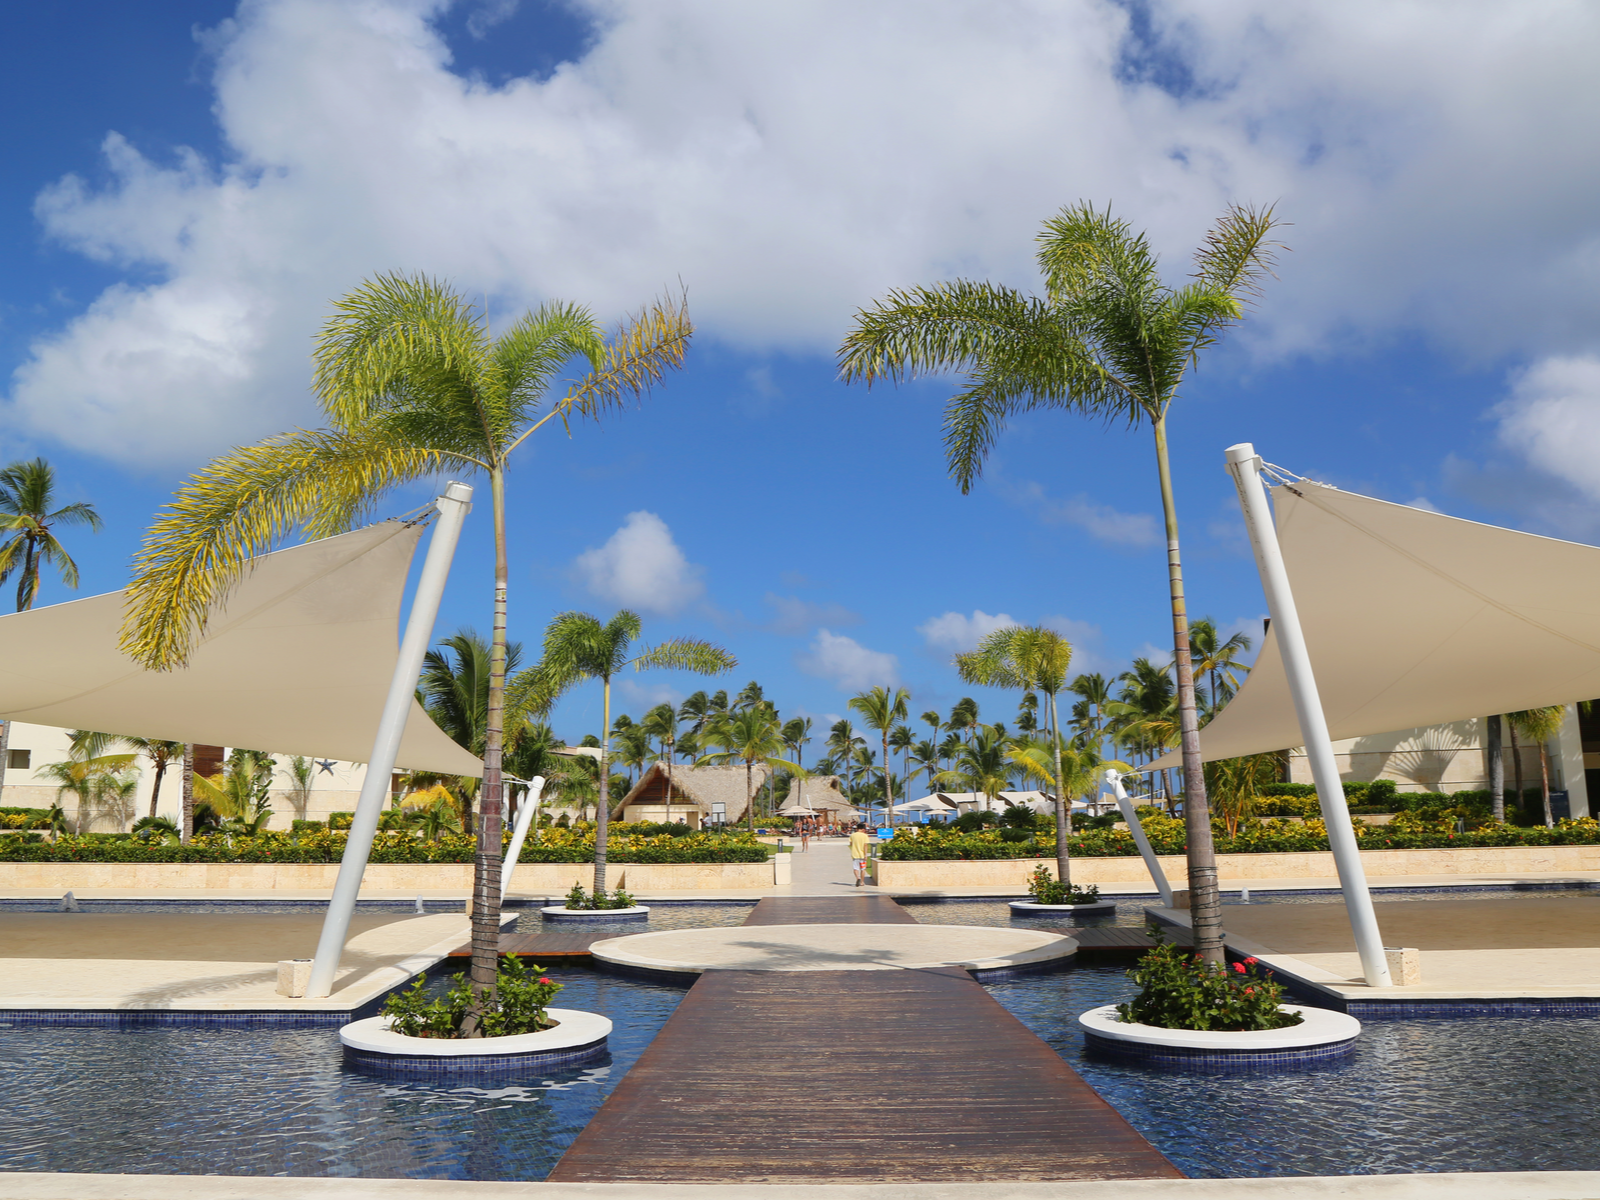 Palms trees planted by the pool along a footpath across the pool span in Royalton All-inclusive Resort and Casino, one of the best all-inclusive resorts in Punta Cana